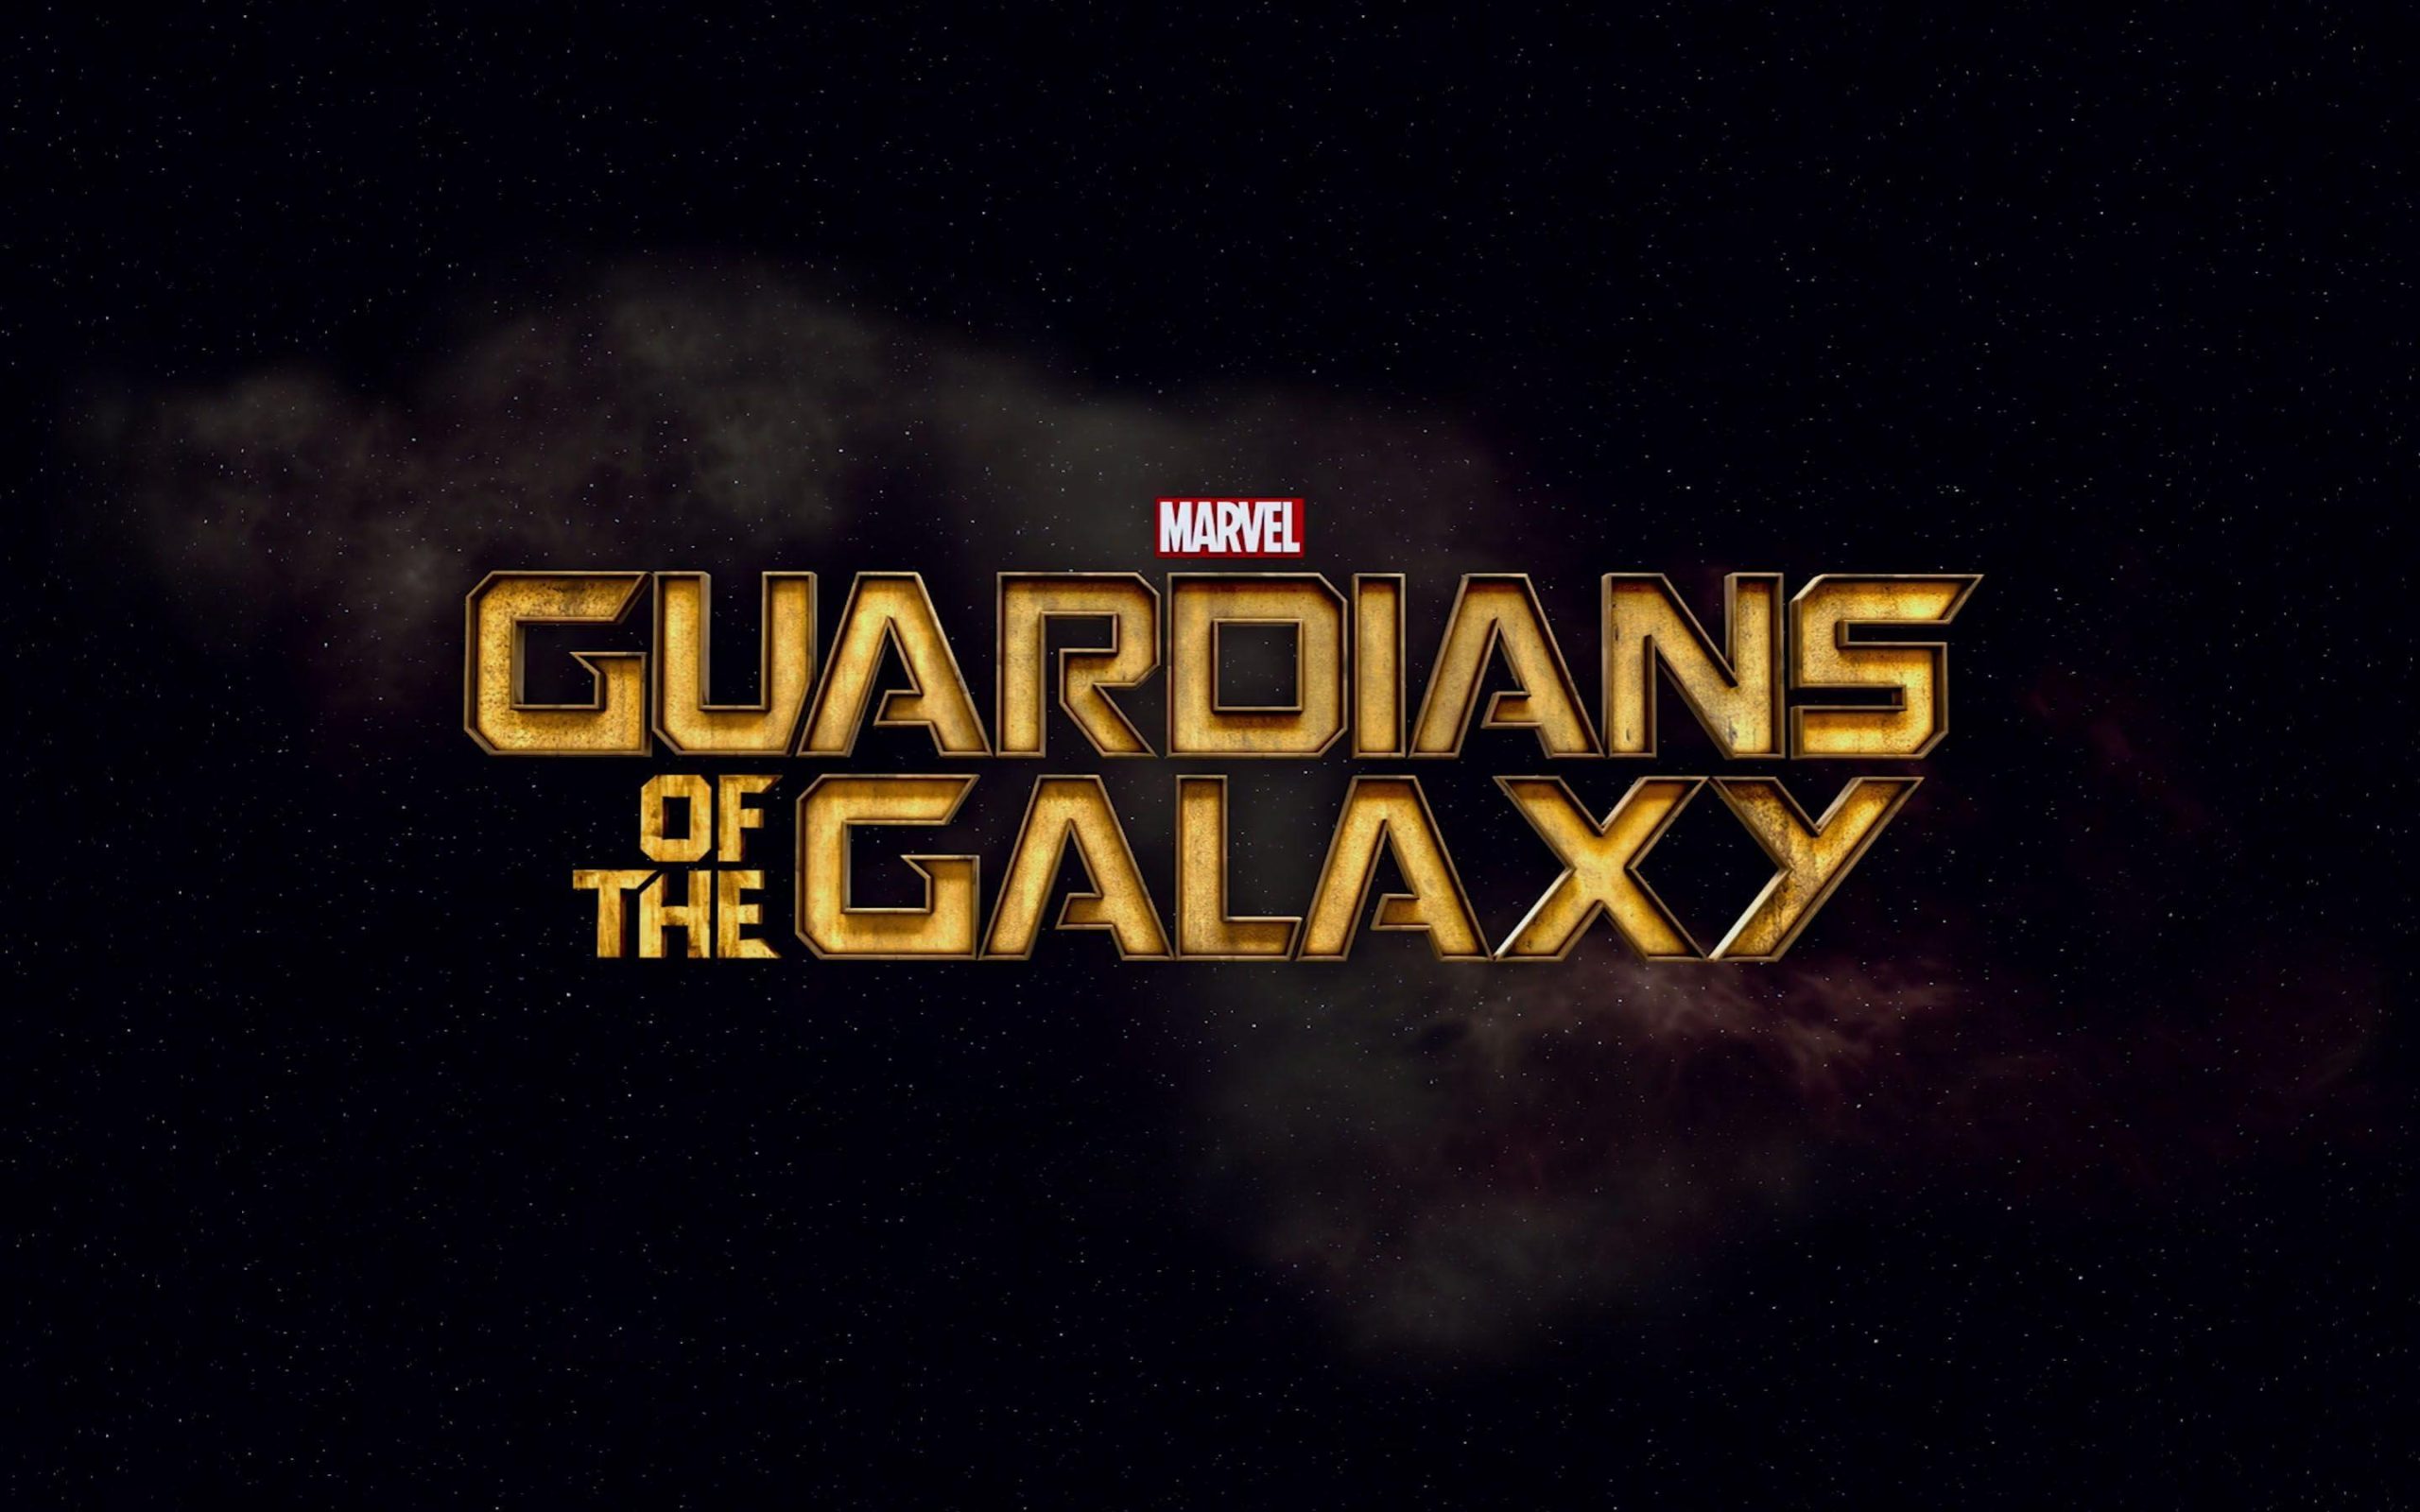 The Guardians Of The Galaxy Wallpaper, The Guardians Of The Galaxy, Movies